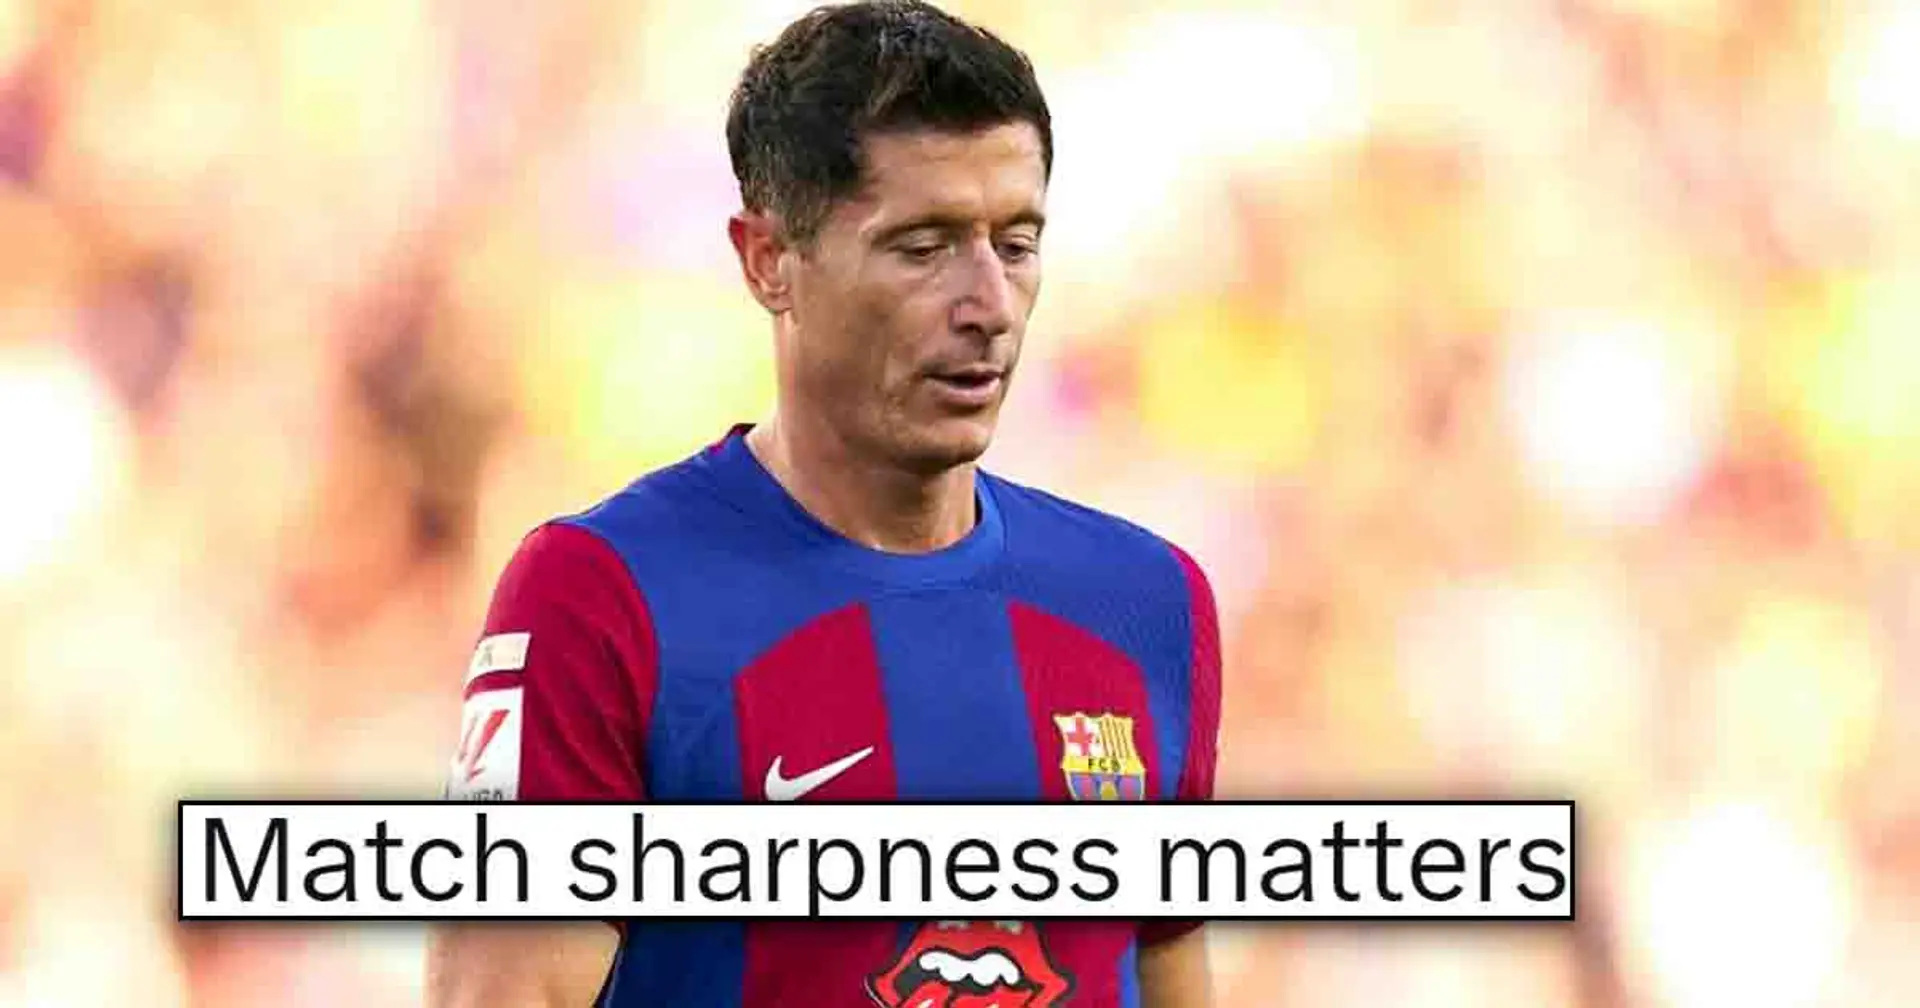 'He literally got no service': Barca fan explains why Lewandowski shouldn't be criticized for Real Sociedad display